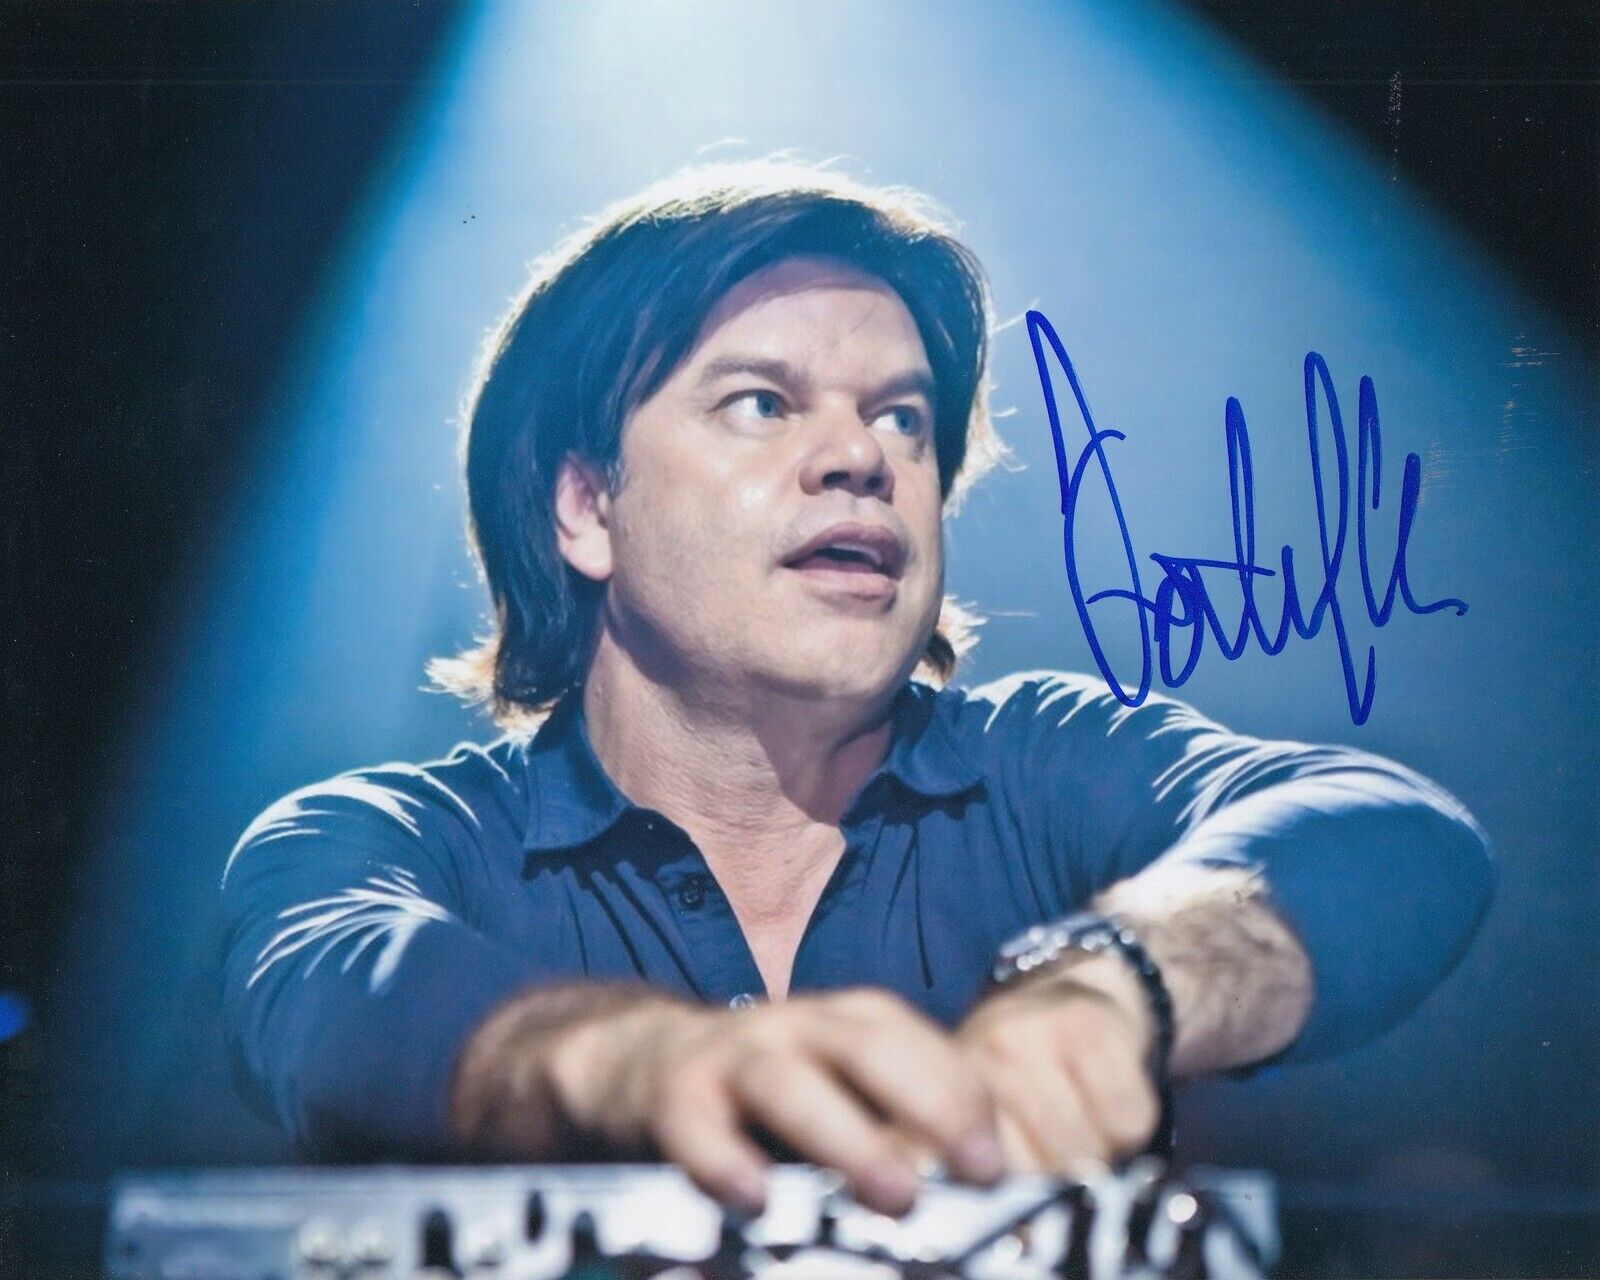 PAUL OAKENFOLD signed (3 X GRAMMY NOMINEE DJ) Perfecto music 8X10 Photo Poster painting W/COA #2